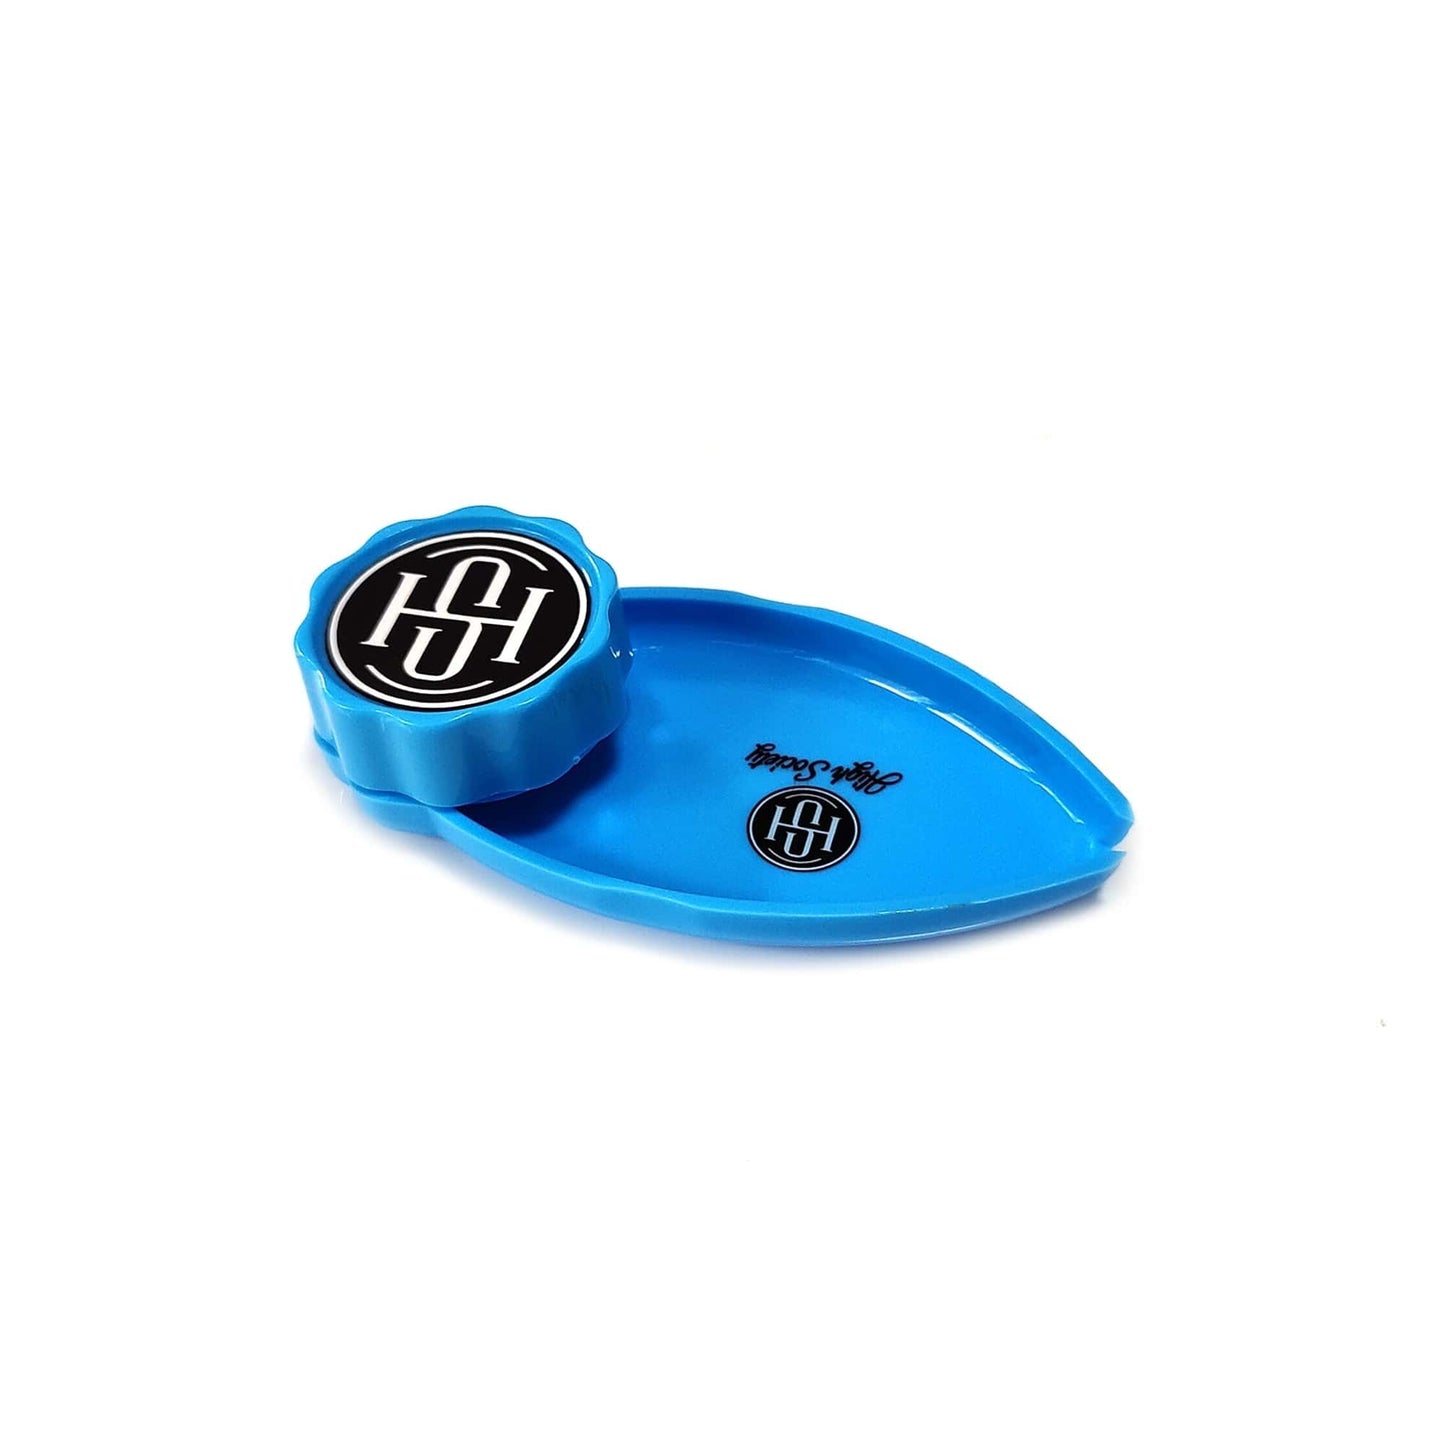 High Society High Society | Mini Rolling Tray Grinder Combo - Neon Blue